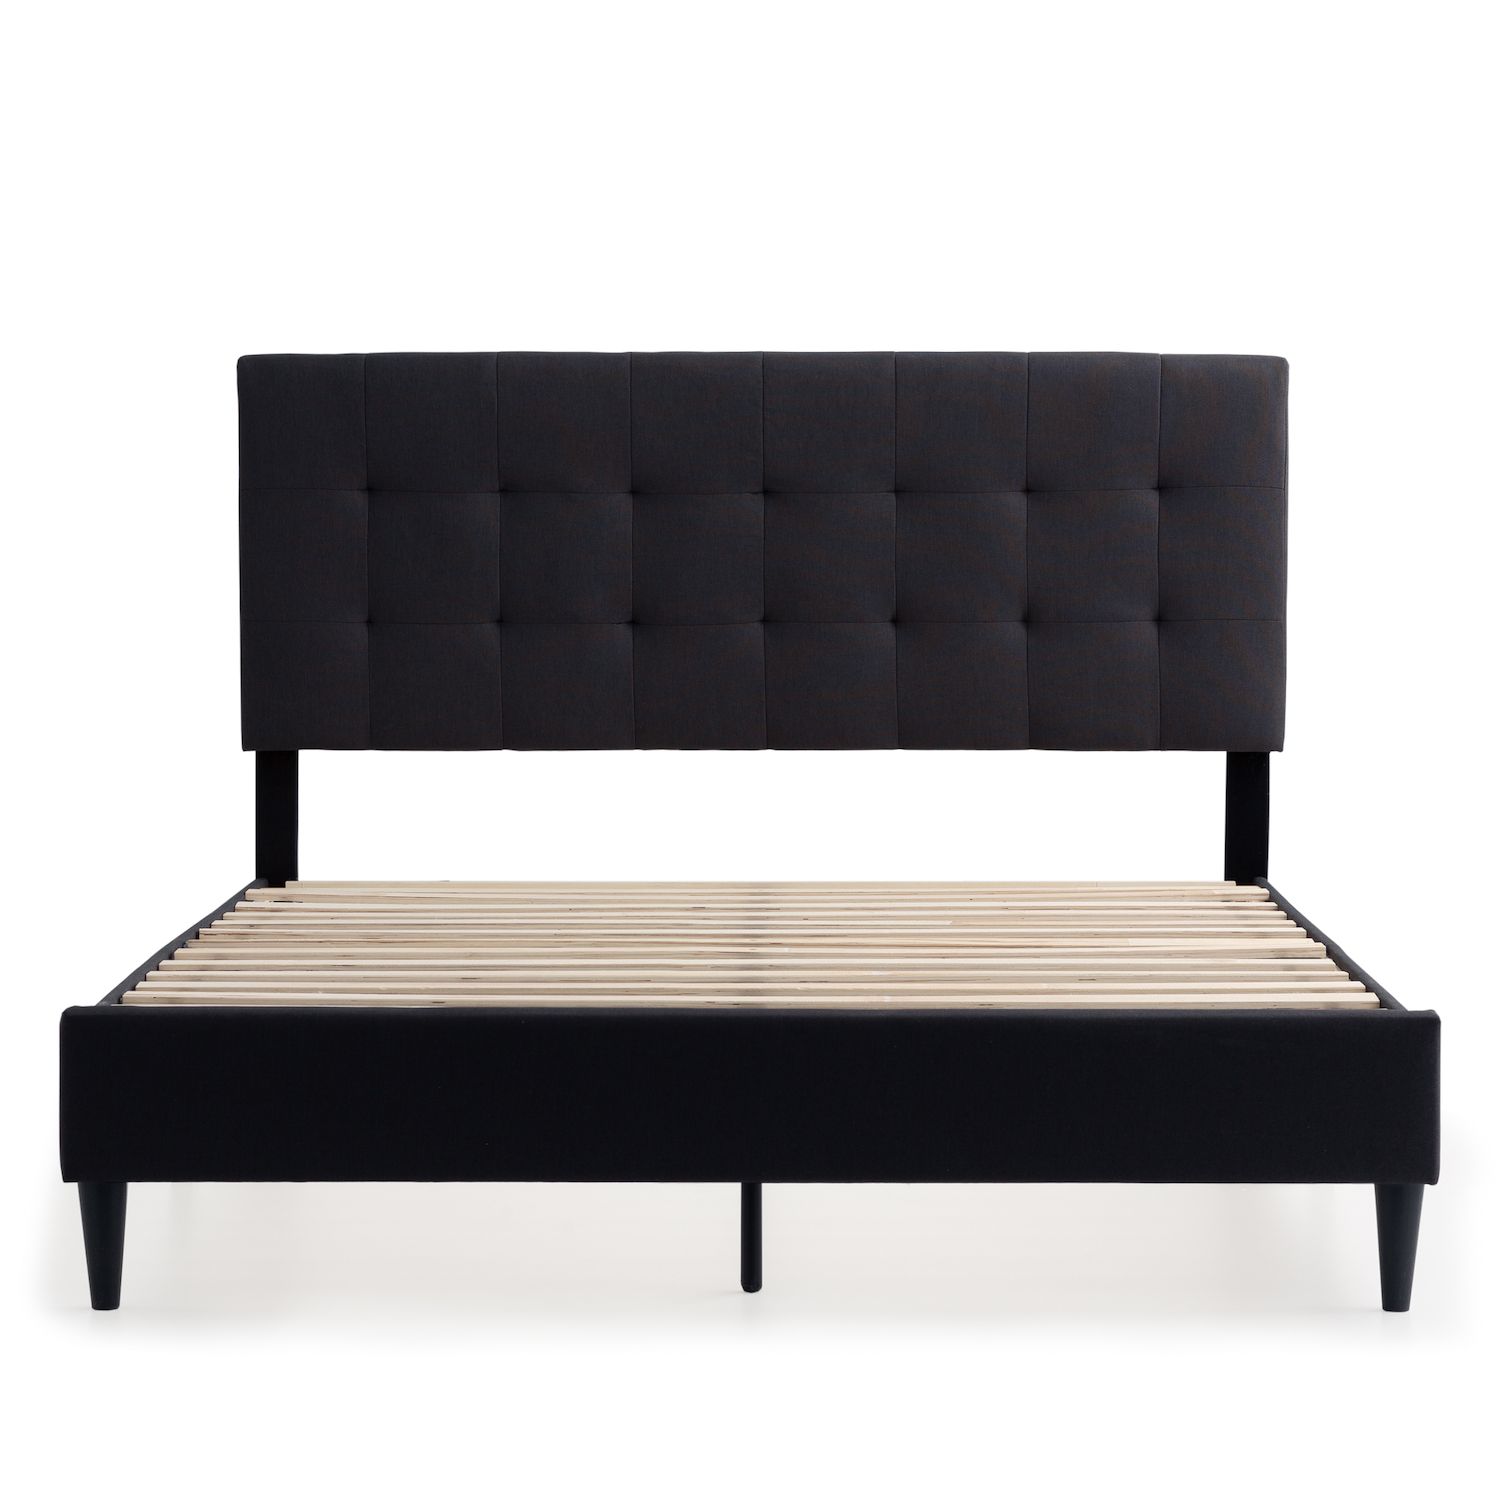 Image for Dream Collection Lucid Square Tufted Upholstered Bed at Kohl's.